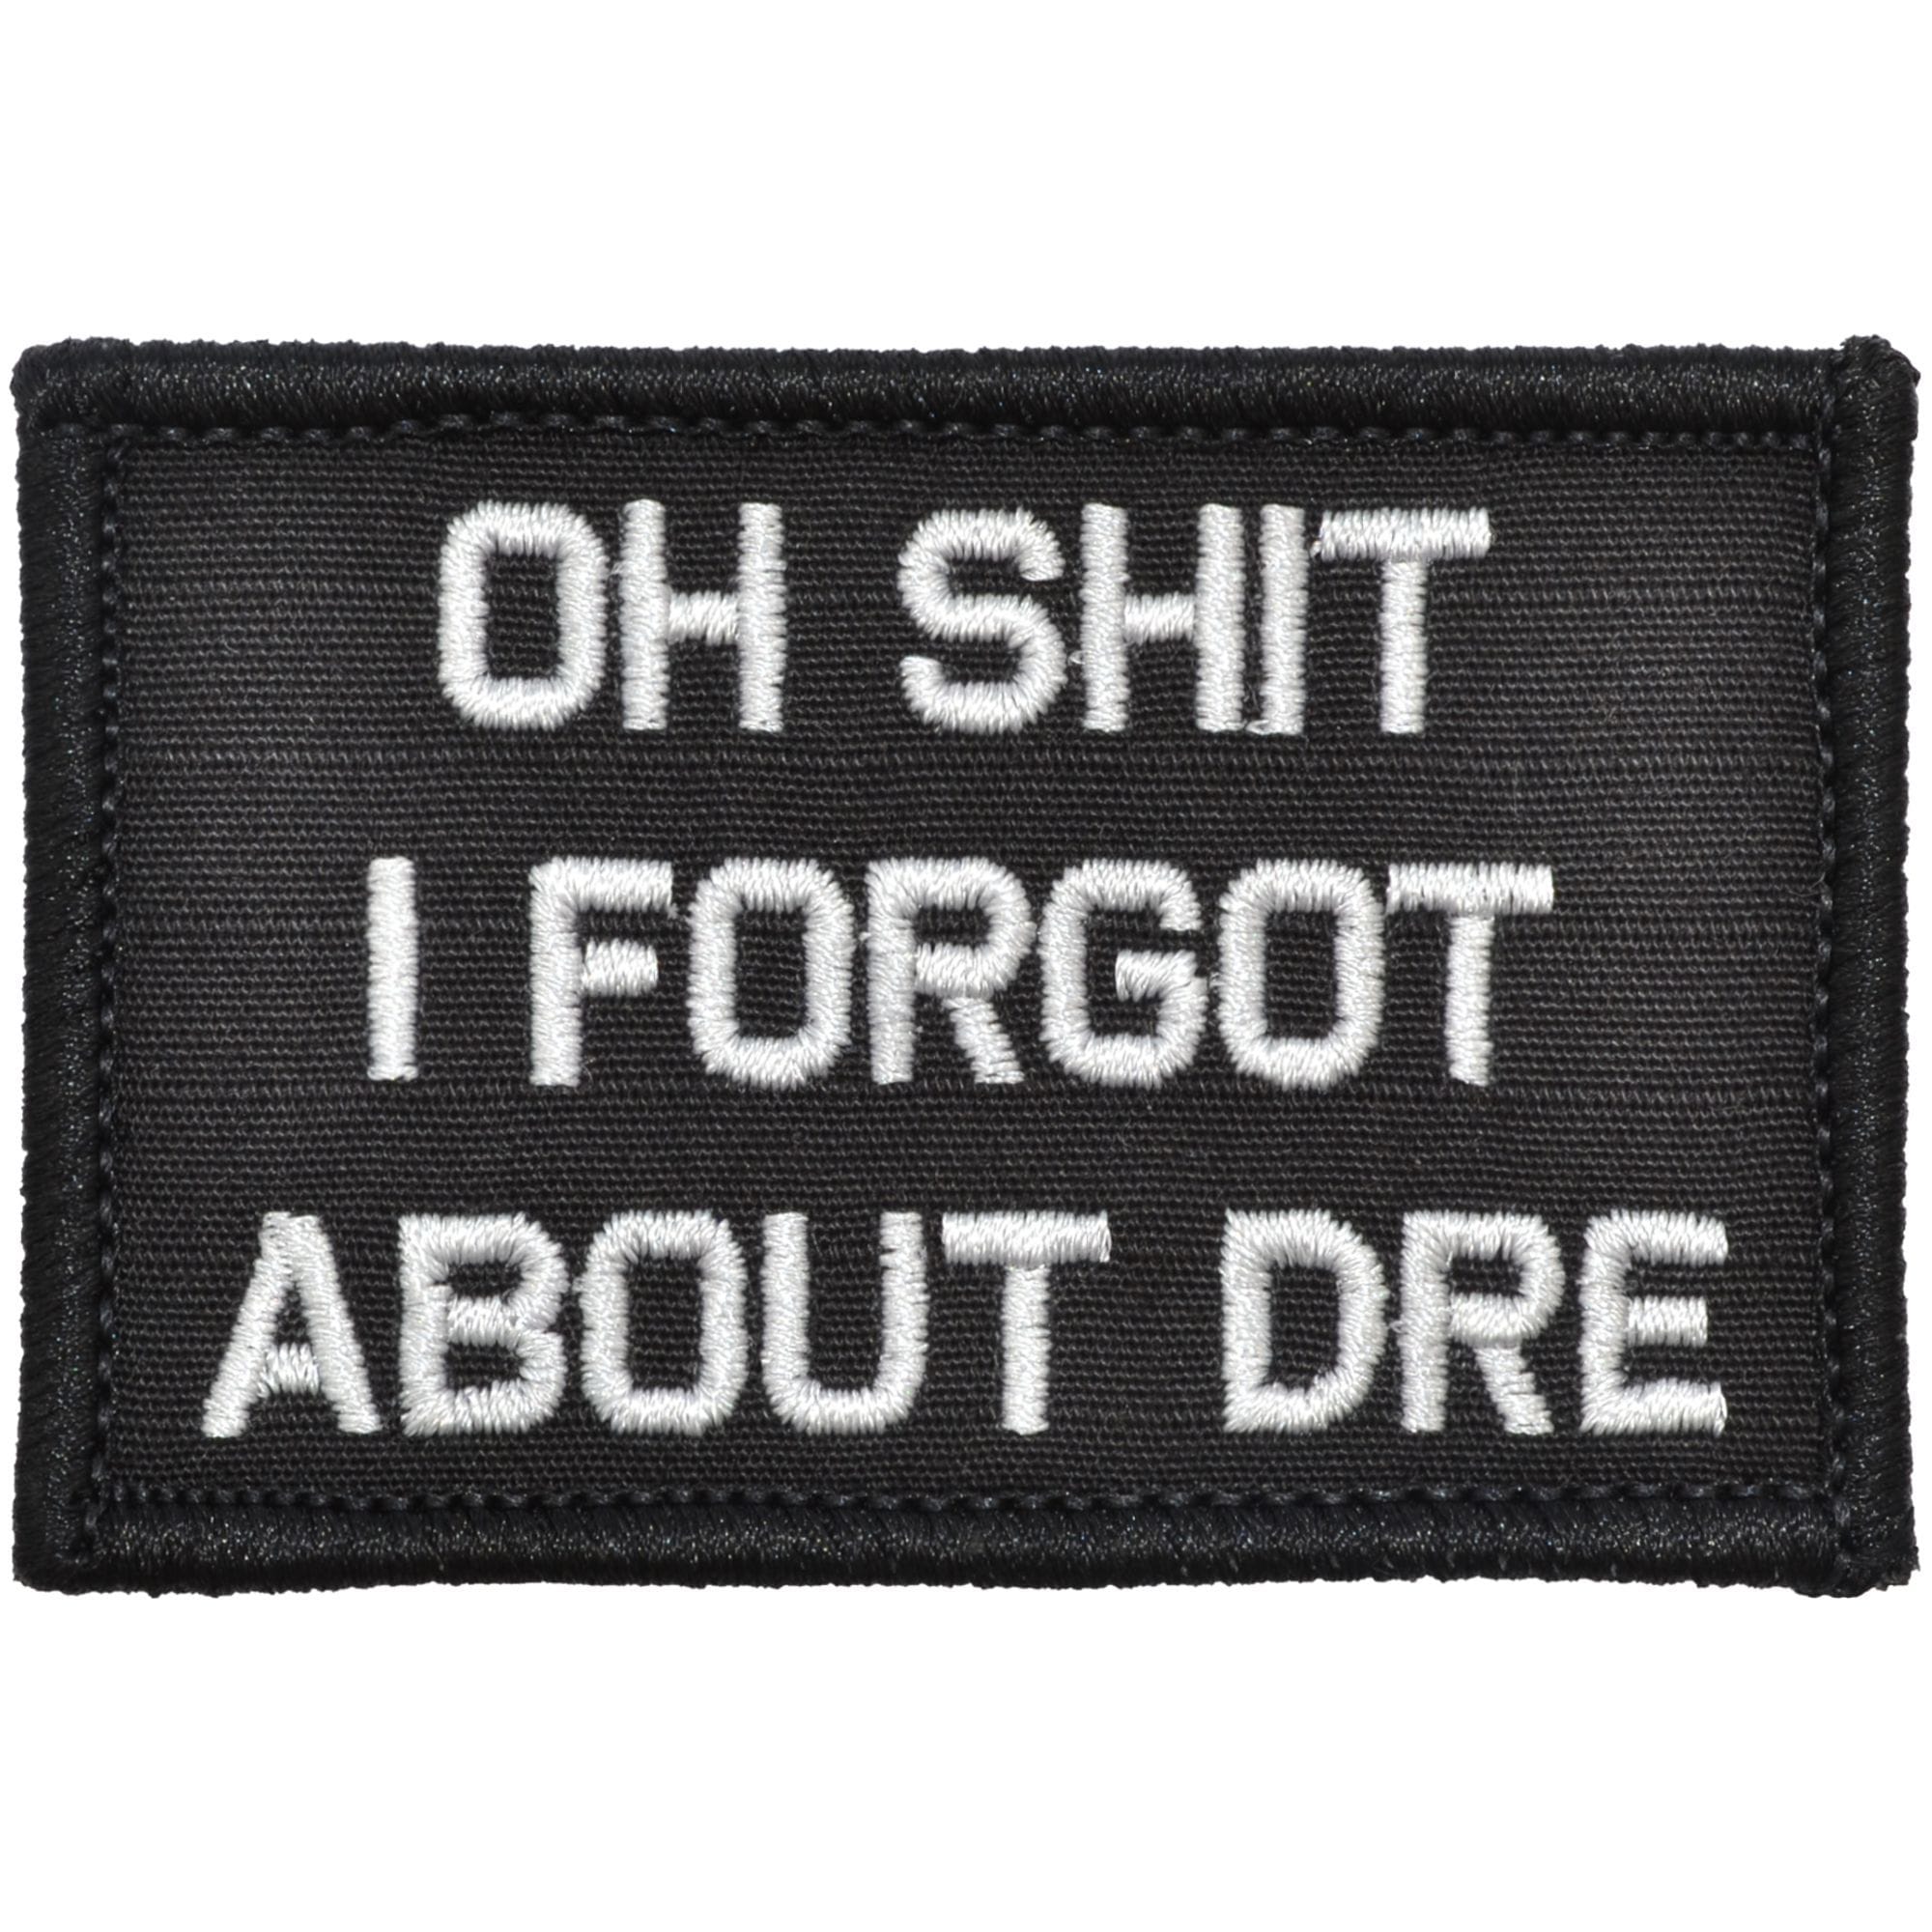 Tactical Gear Junkie Patches Black Oh Shit I Forgot About Dre - 2x3 Patch